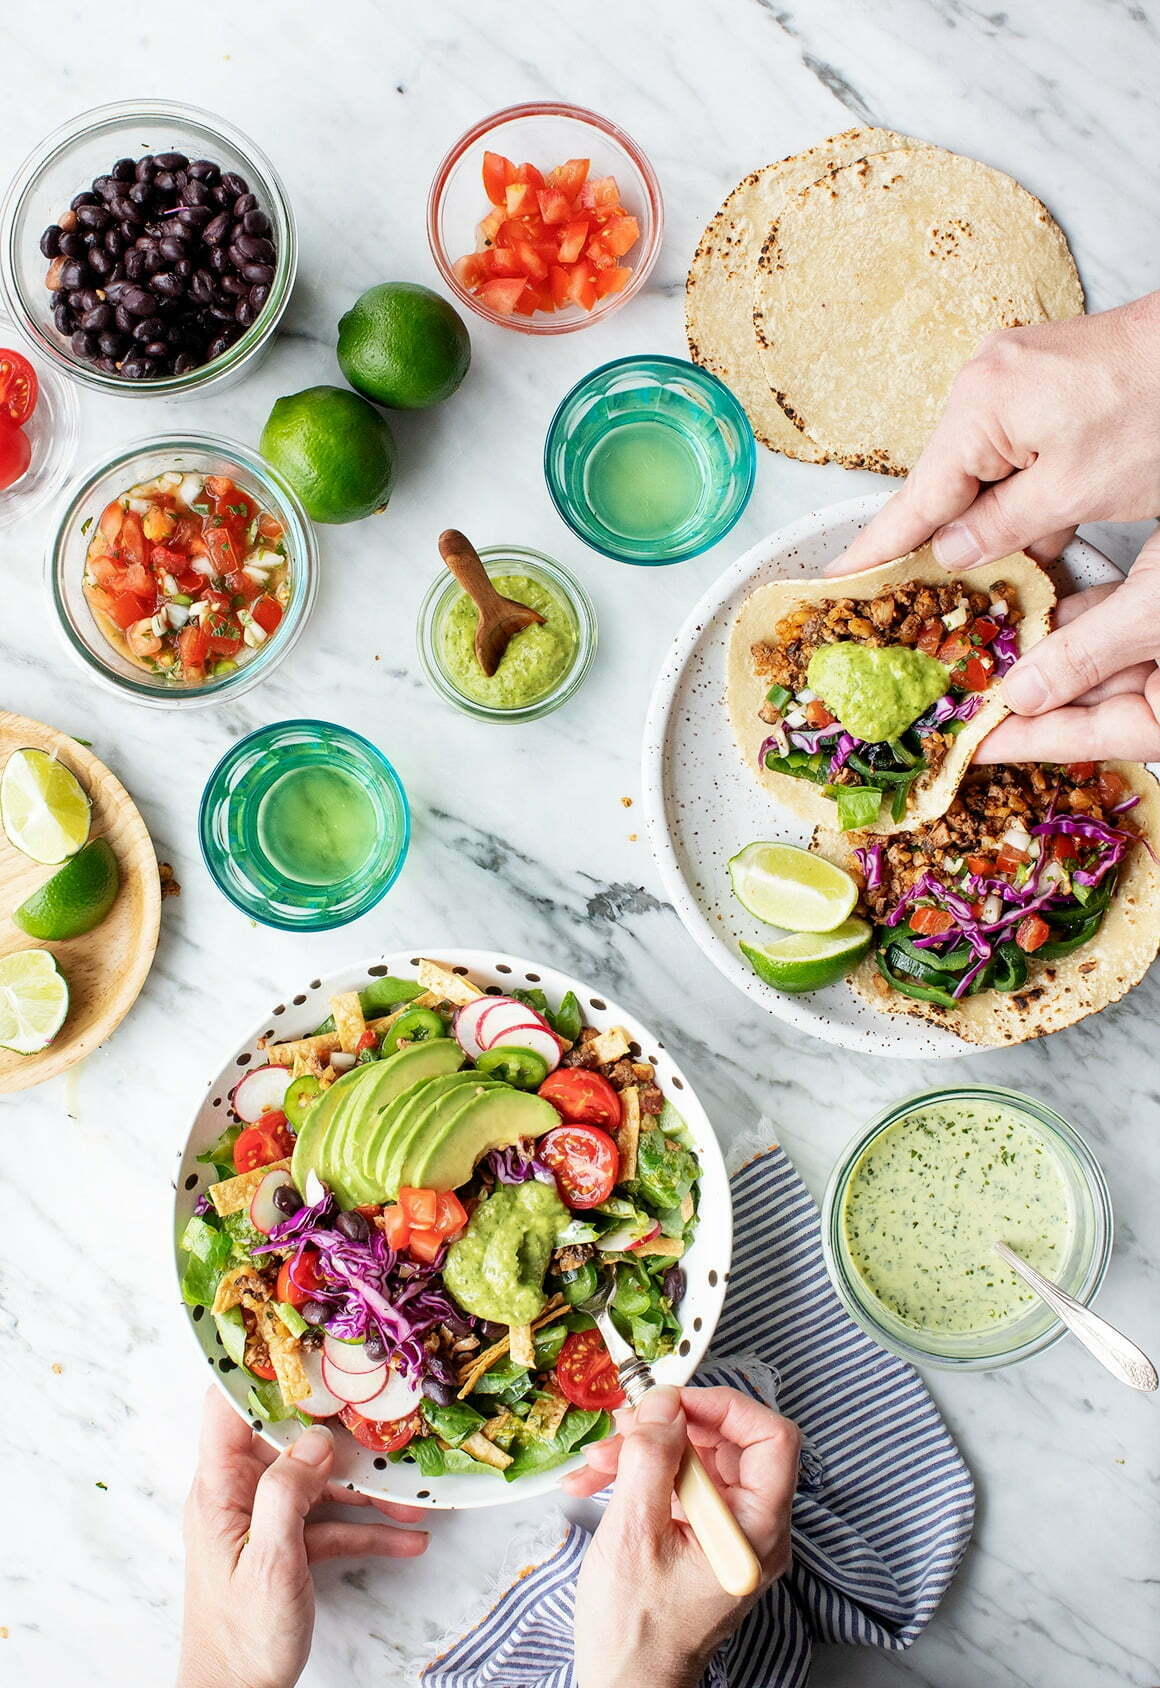 25 Taco Toppings for Your Next Taco Bar - Love and Lemons